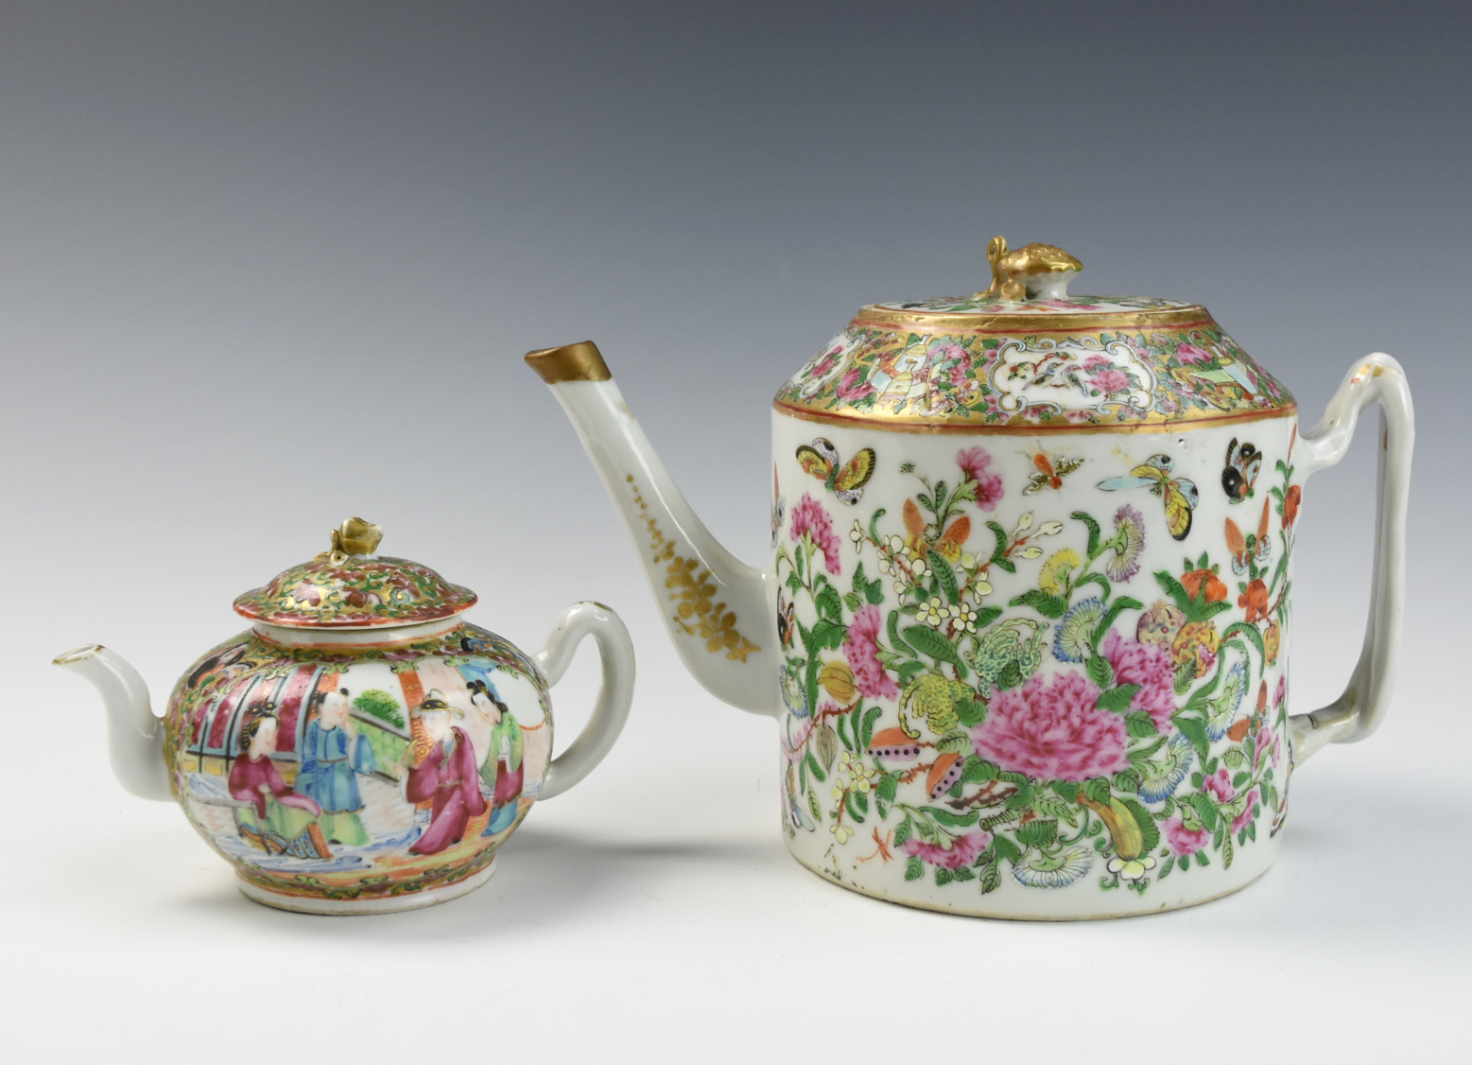 TWO CHINESE CANTONESE GLAZED TEAPOTS